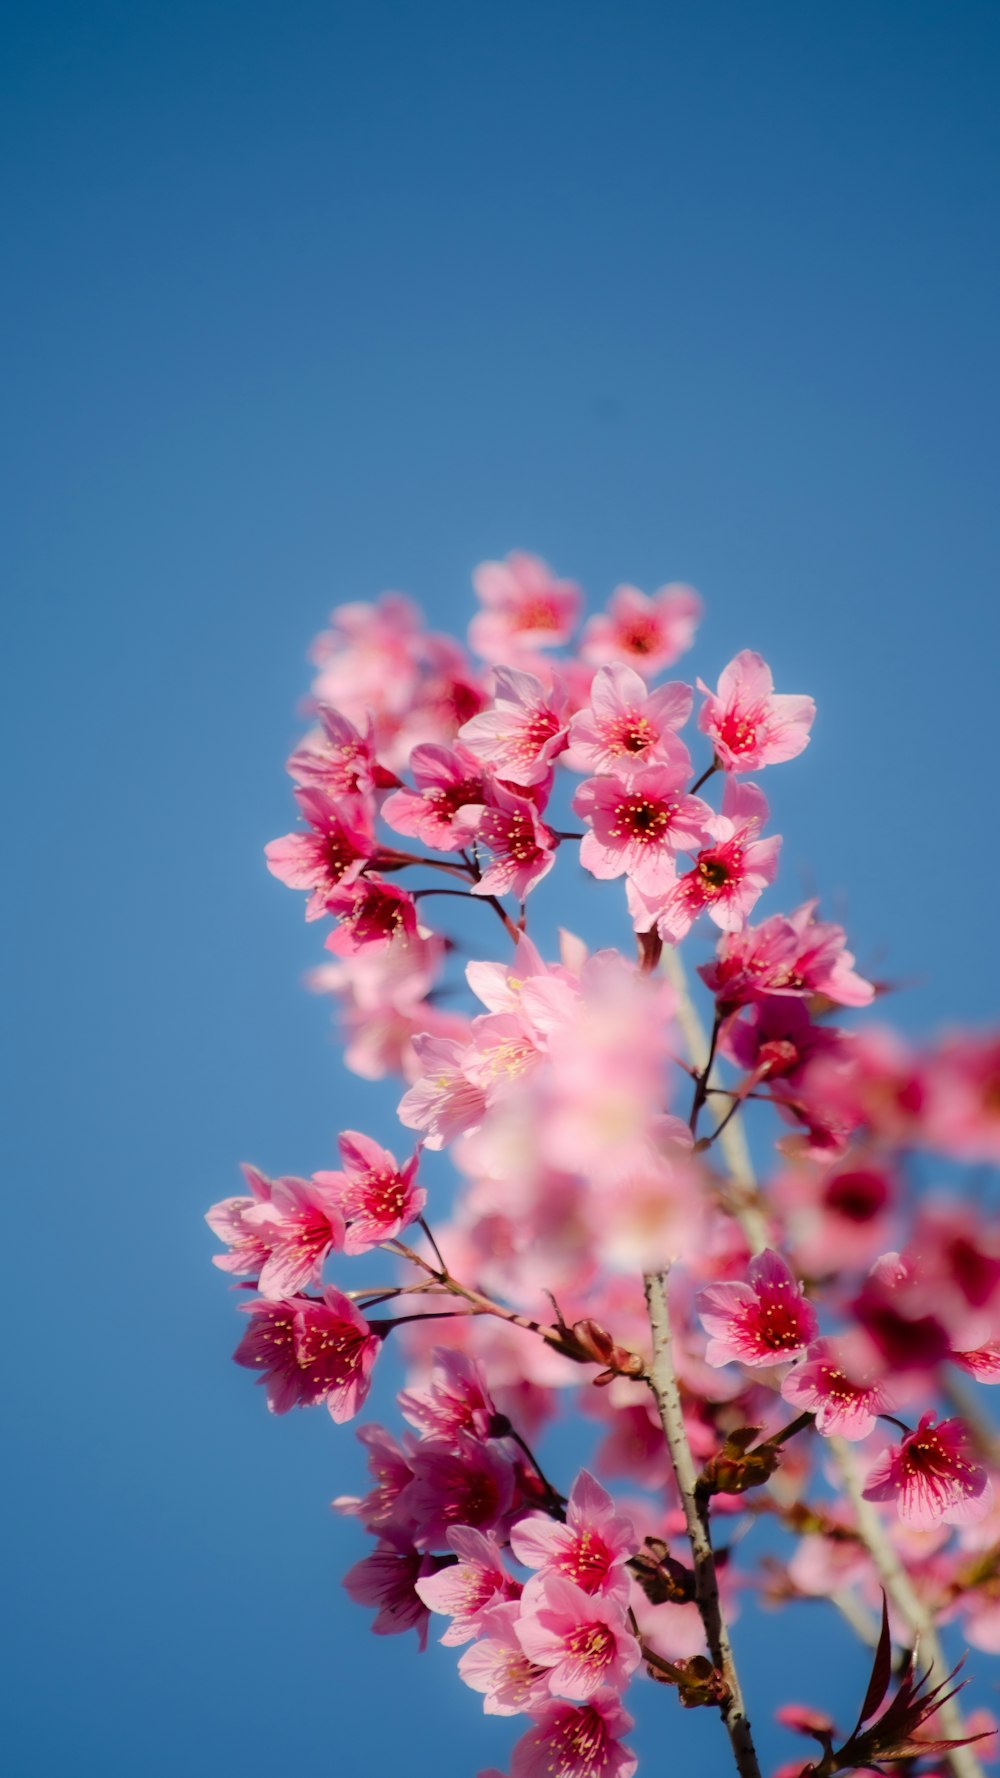 a branch of pink flowers against a blue sky